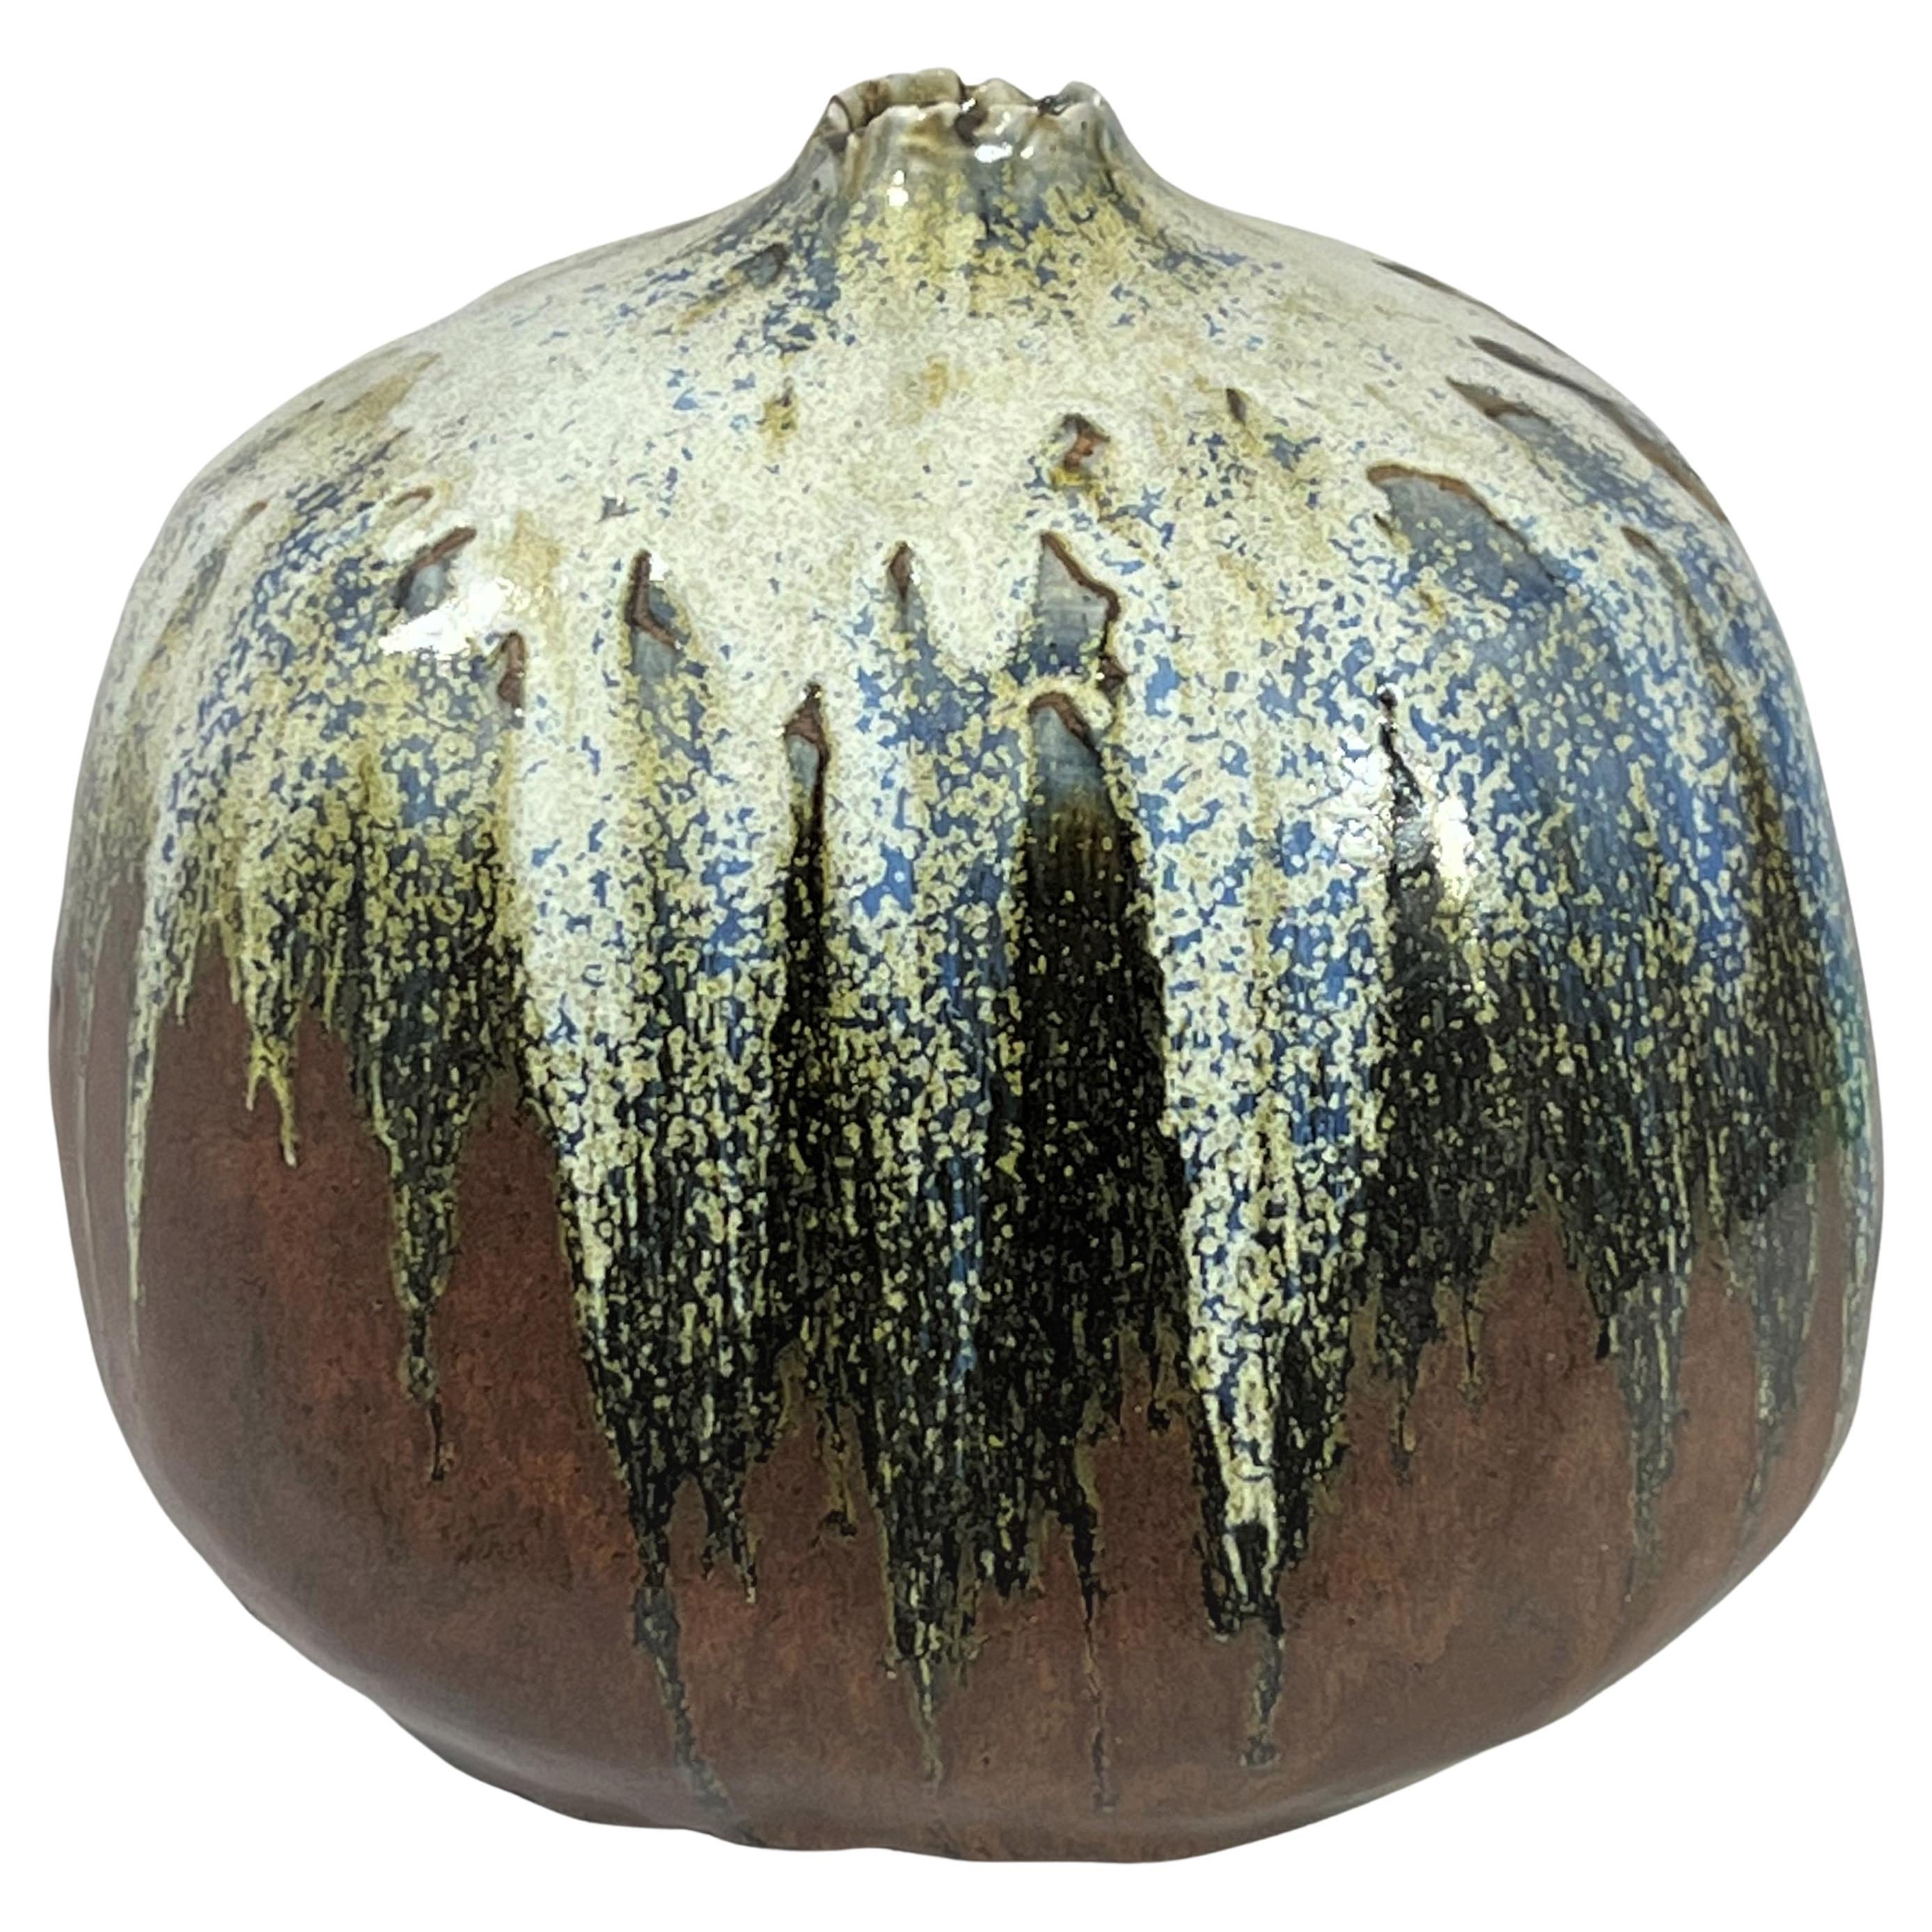 Eric Ploen Norway Altered Weed Vase Form with Layered Crystalline Glazes Ragged